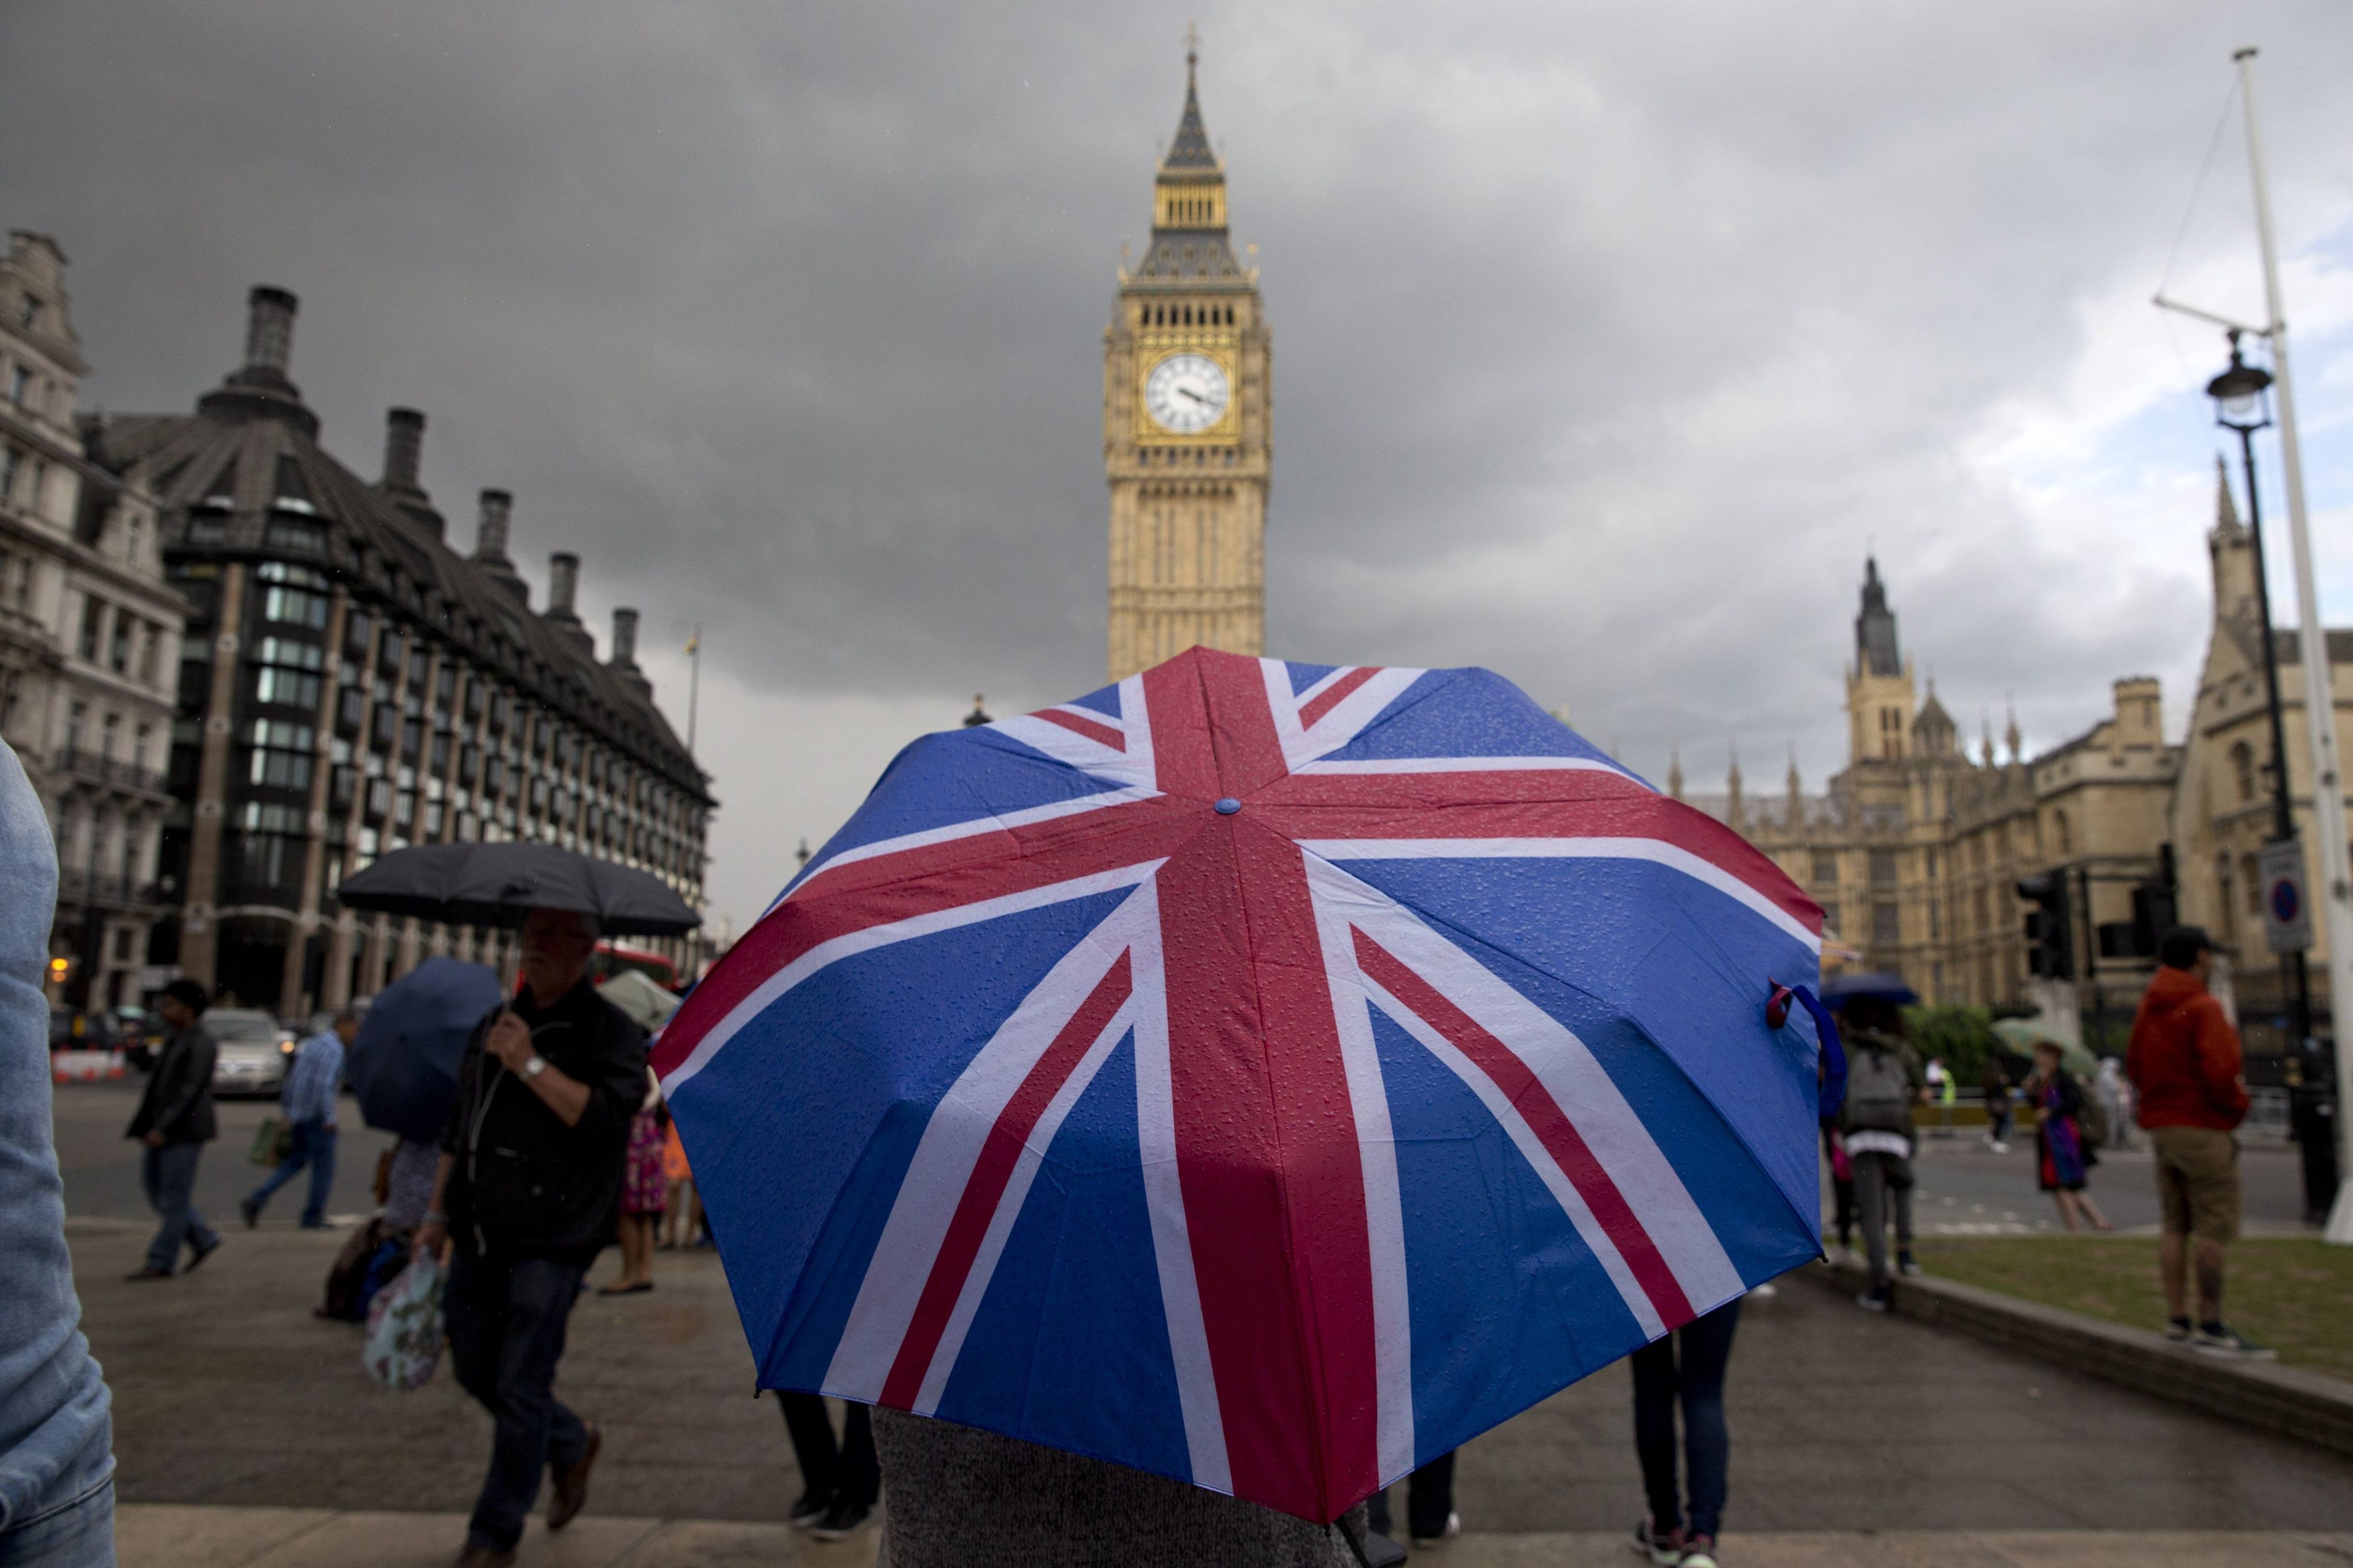 A pedestrian shelters from the rain beneath a Union flag themed umbrella near the Big Ben clock in London in 2016, following the pro-Brexit result of the UK’s EU referendum vote. Photo: AFP